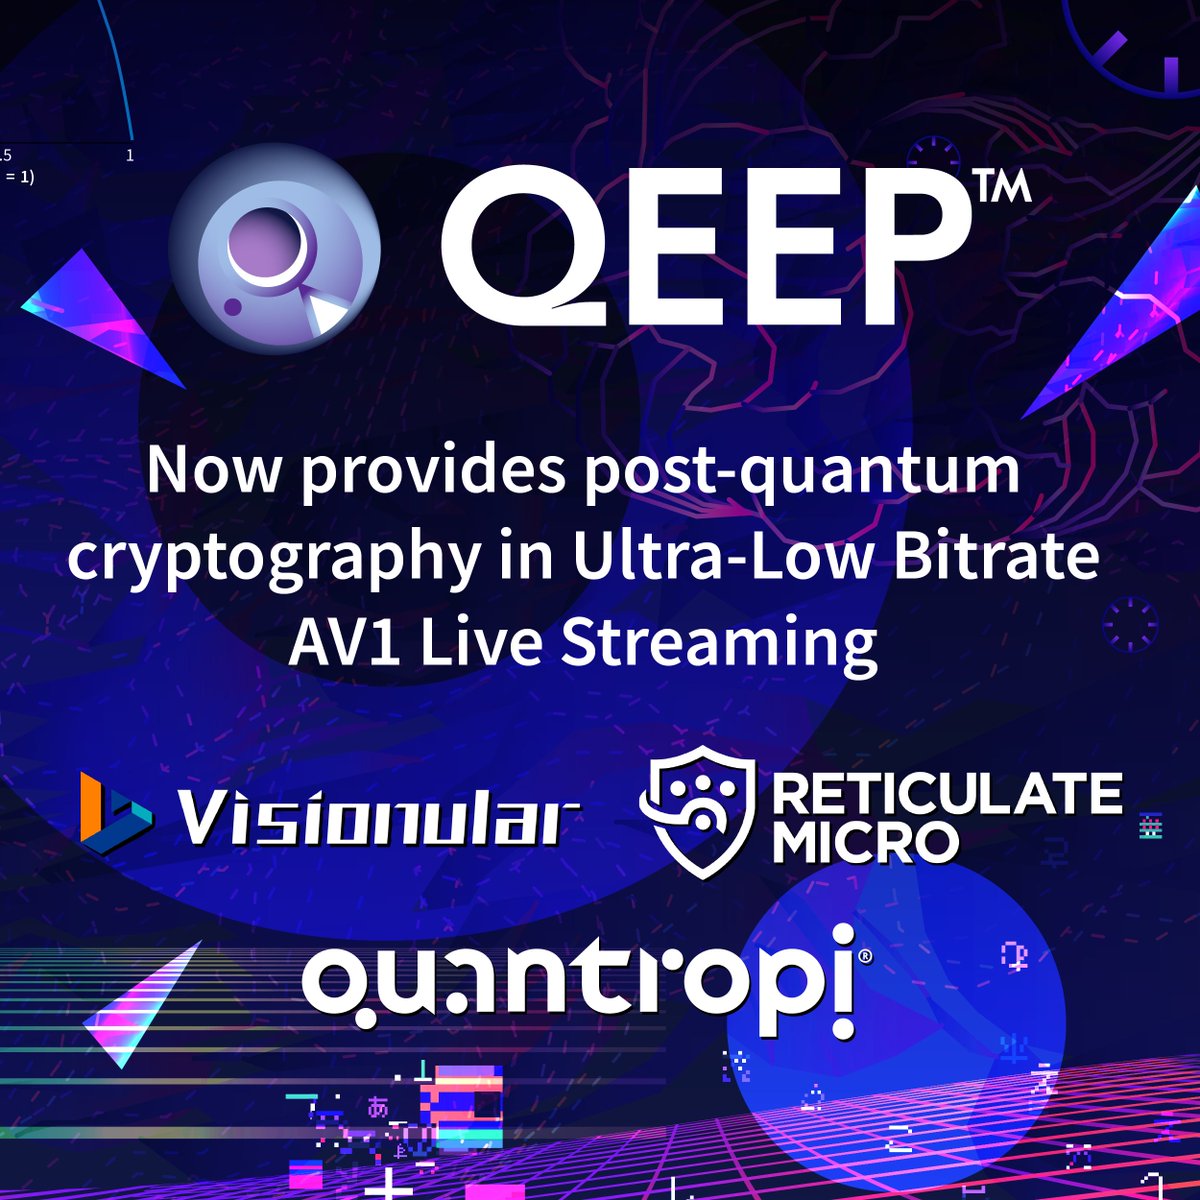 We’re excited to announce that the transformational partnership of @reticulateio and @Visionular1 will be using @Quantropi's QEEP™ symmetric encryption to quantum-secure broadcast video, bringing innovation to the live streaming industry. Learn more: hubs.li/Q02v3MqB0